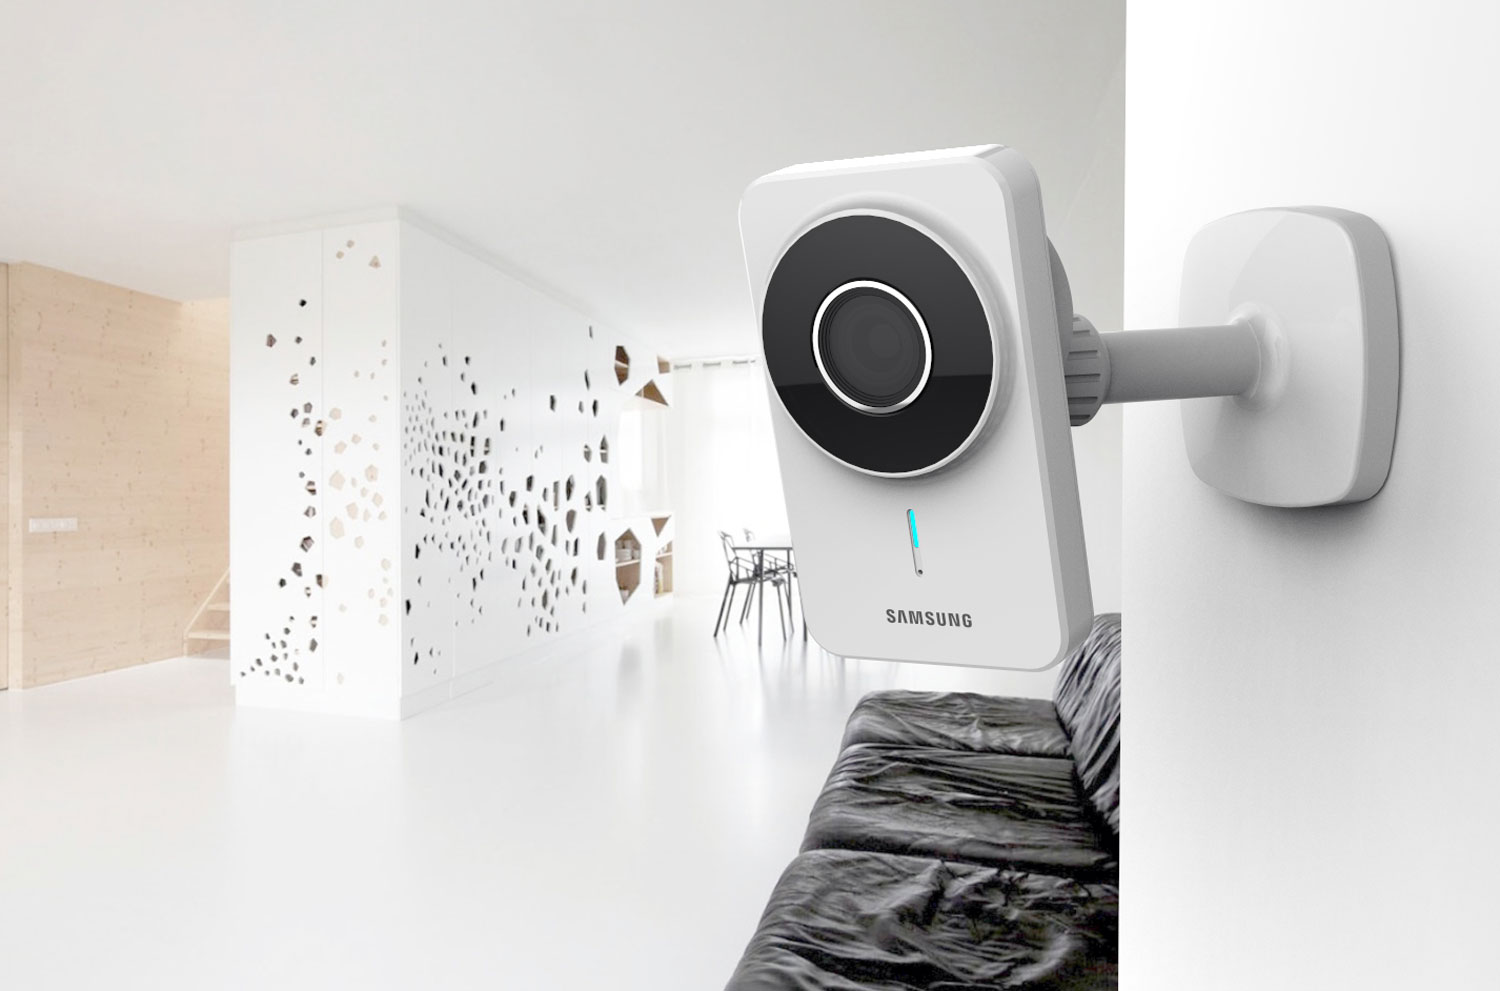 invite big brother into your home with the latest foolproof security cameras header